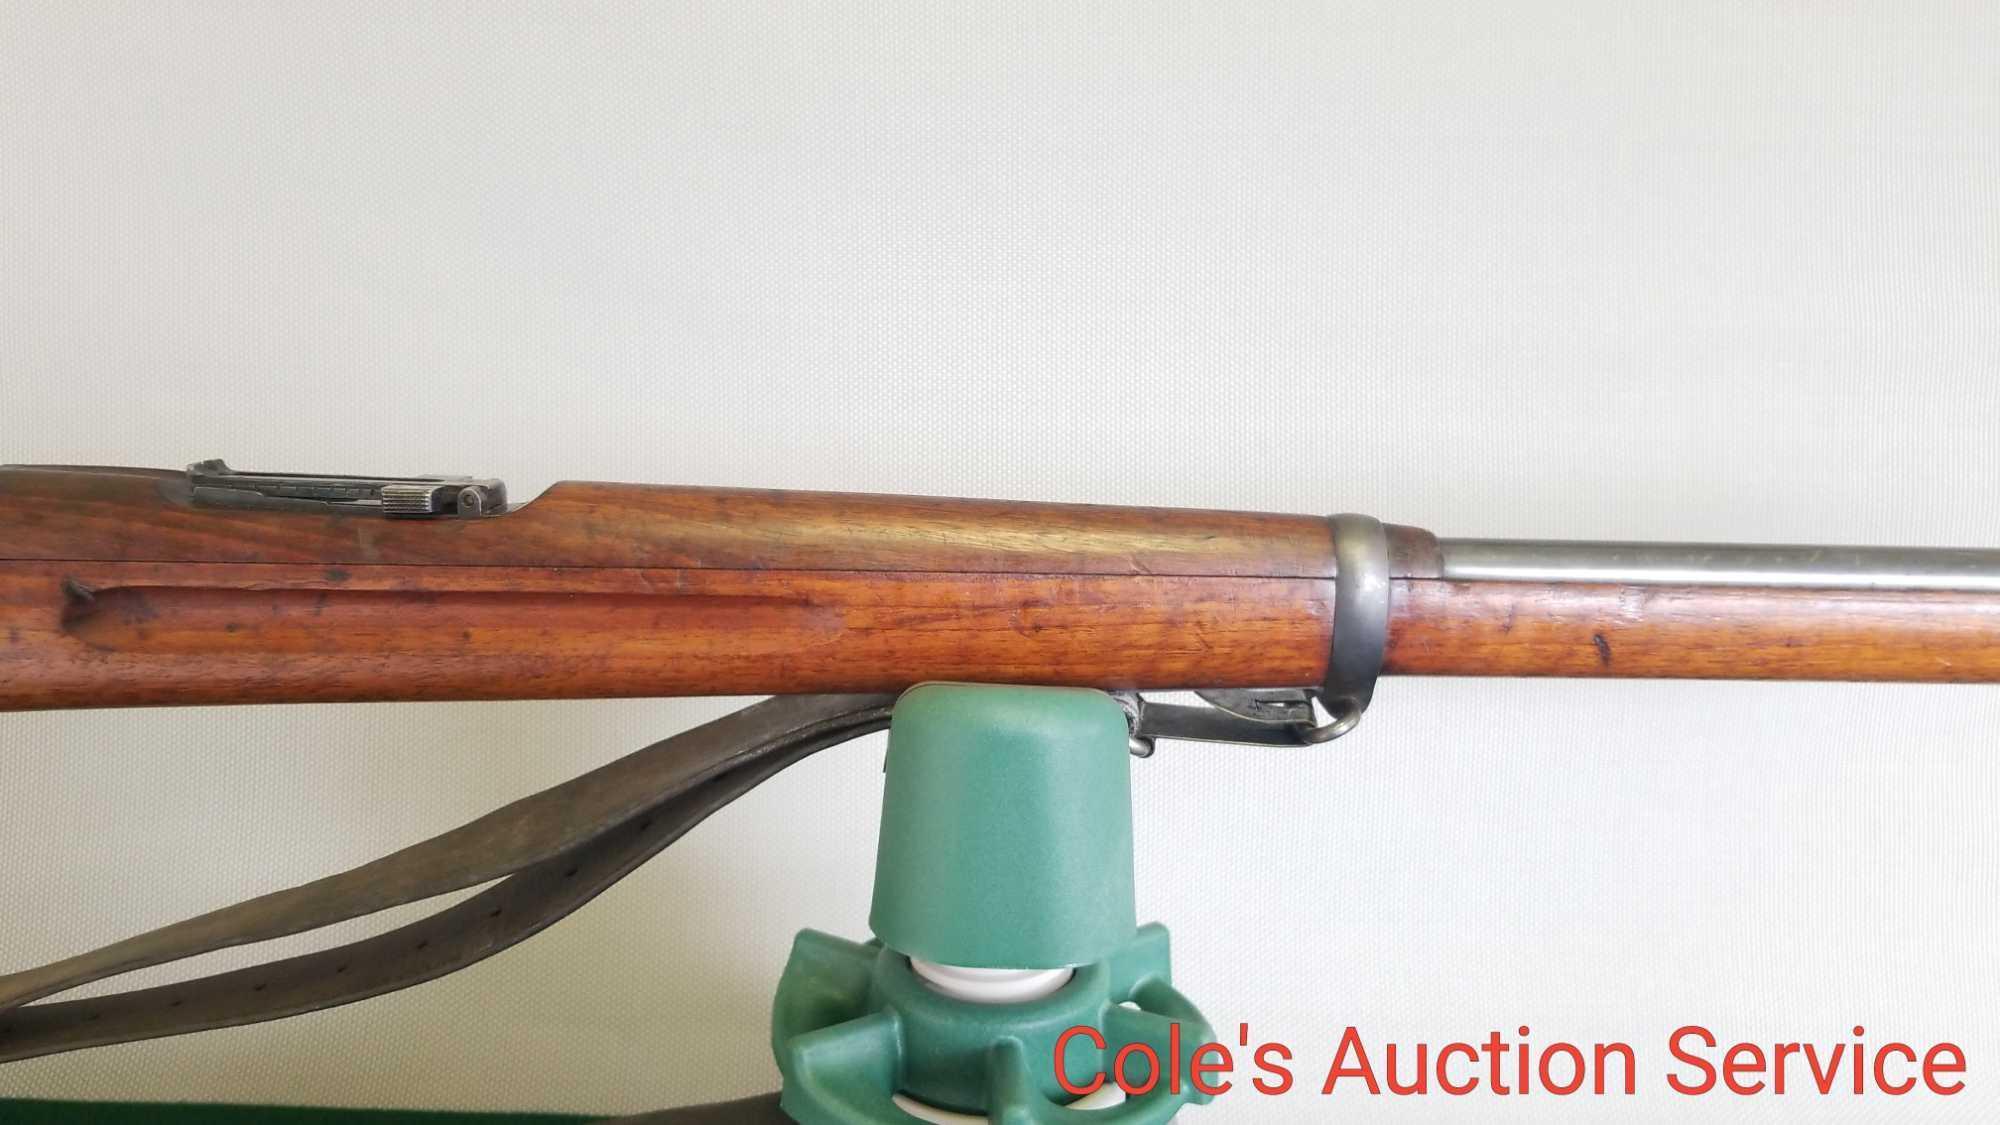 Swedish military Mauser rifle 6.5 x55 mm caliber. Looks to be in great condition. 29 inch barrel,